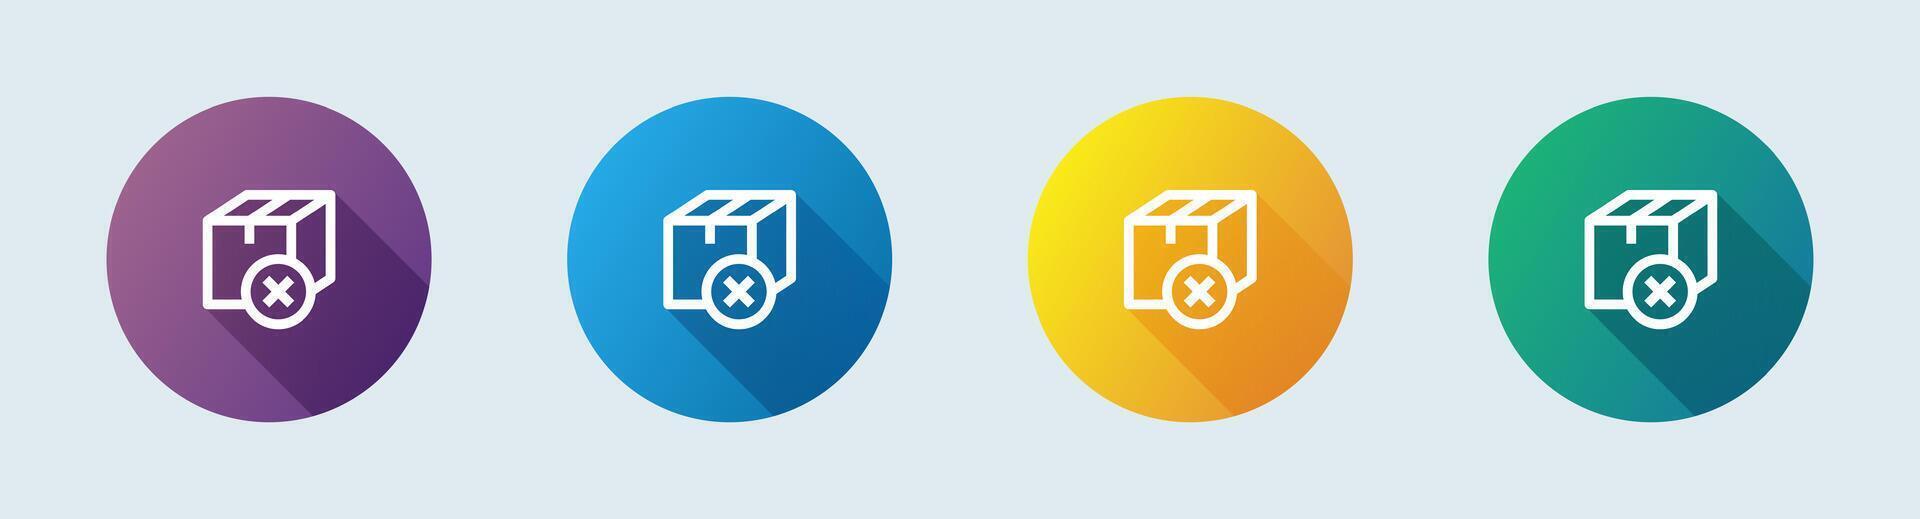 Cancel package line icon in flat design style. Delivery signs vector illustration.